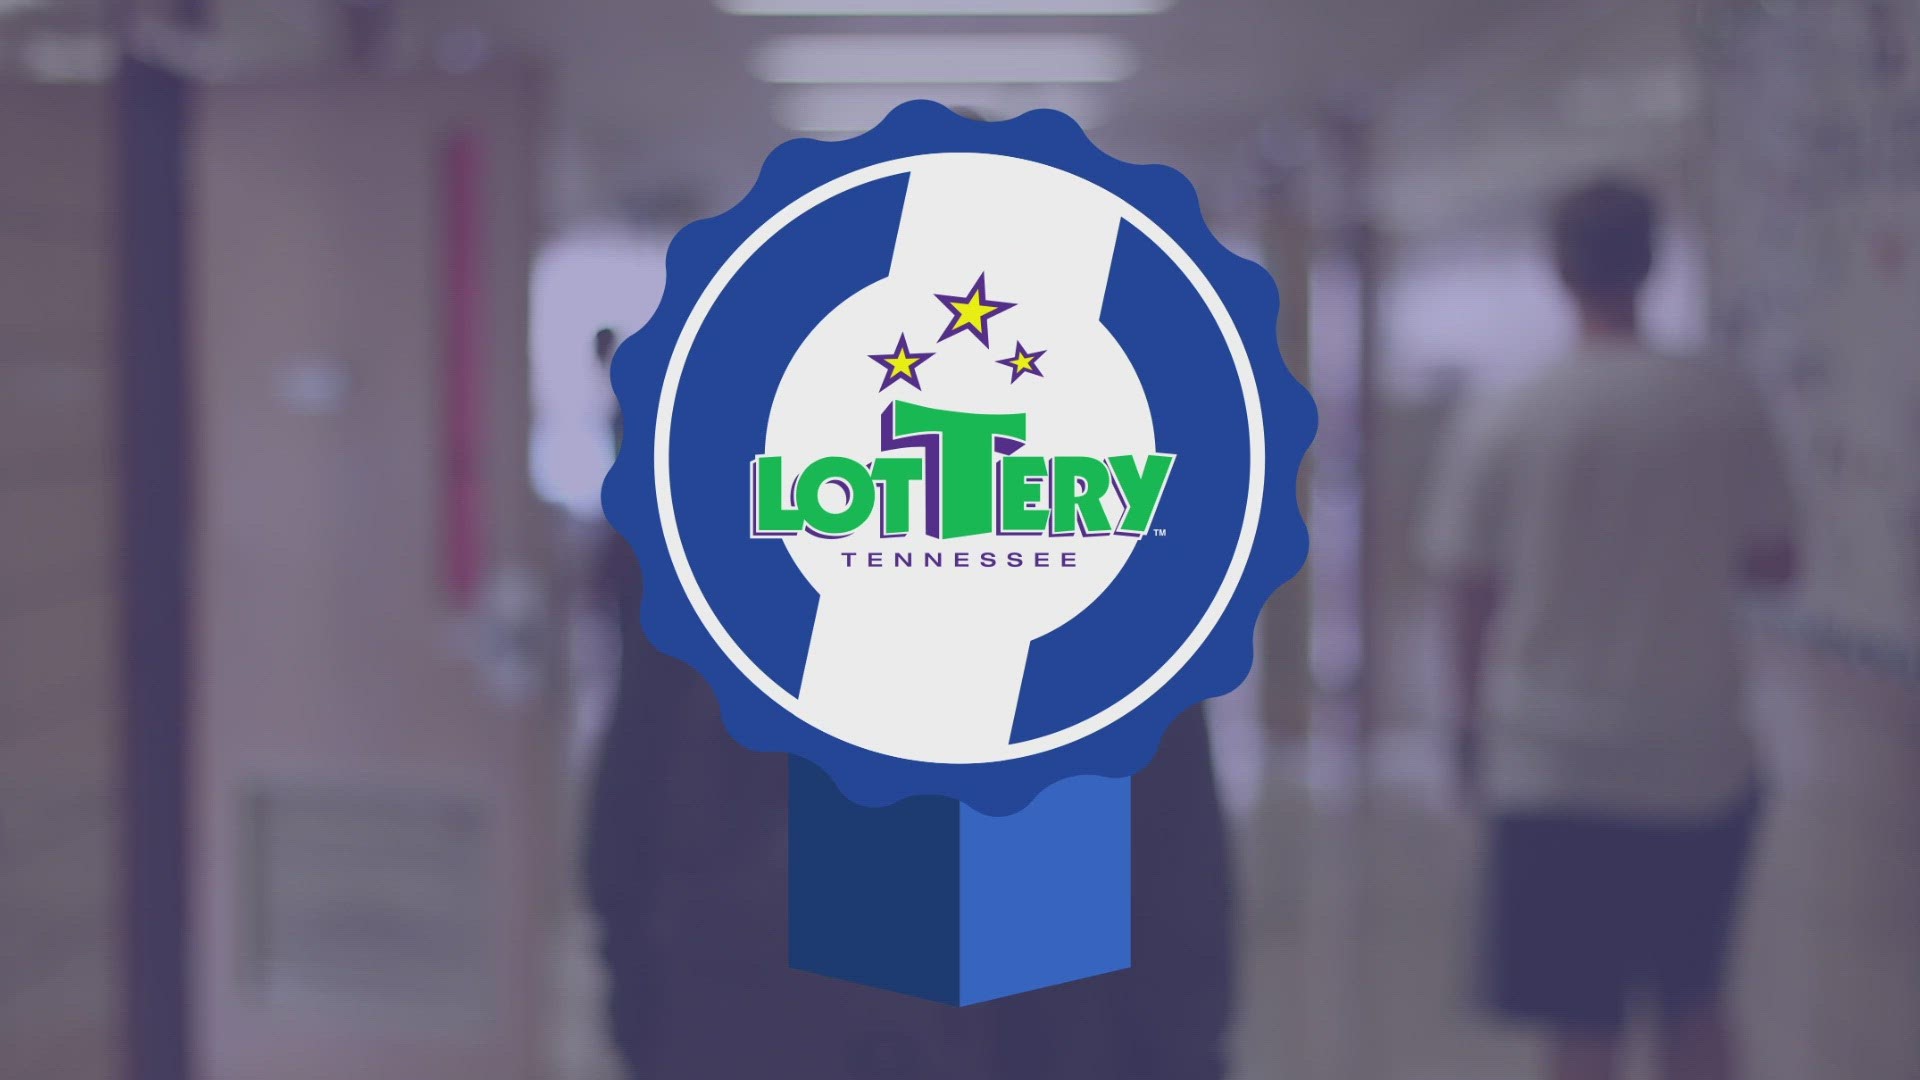 Channel 10, in partnership with the Tennessee Lottery, recognizes educator who are making a difference in our community.